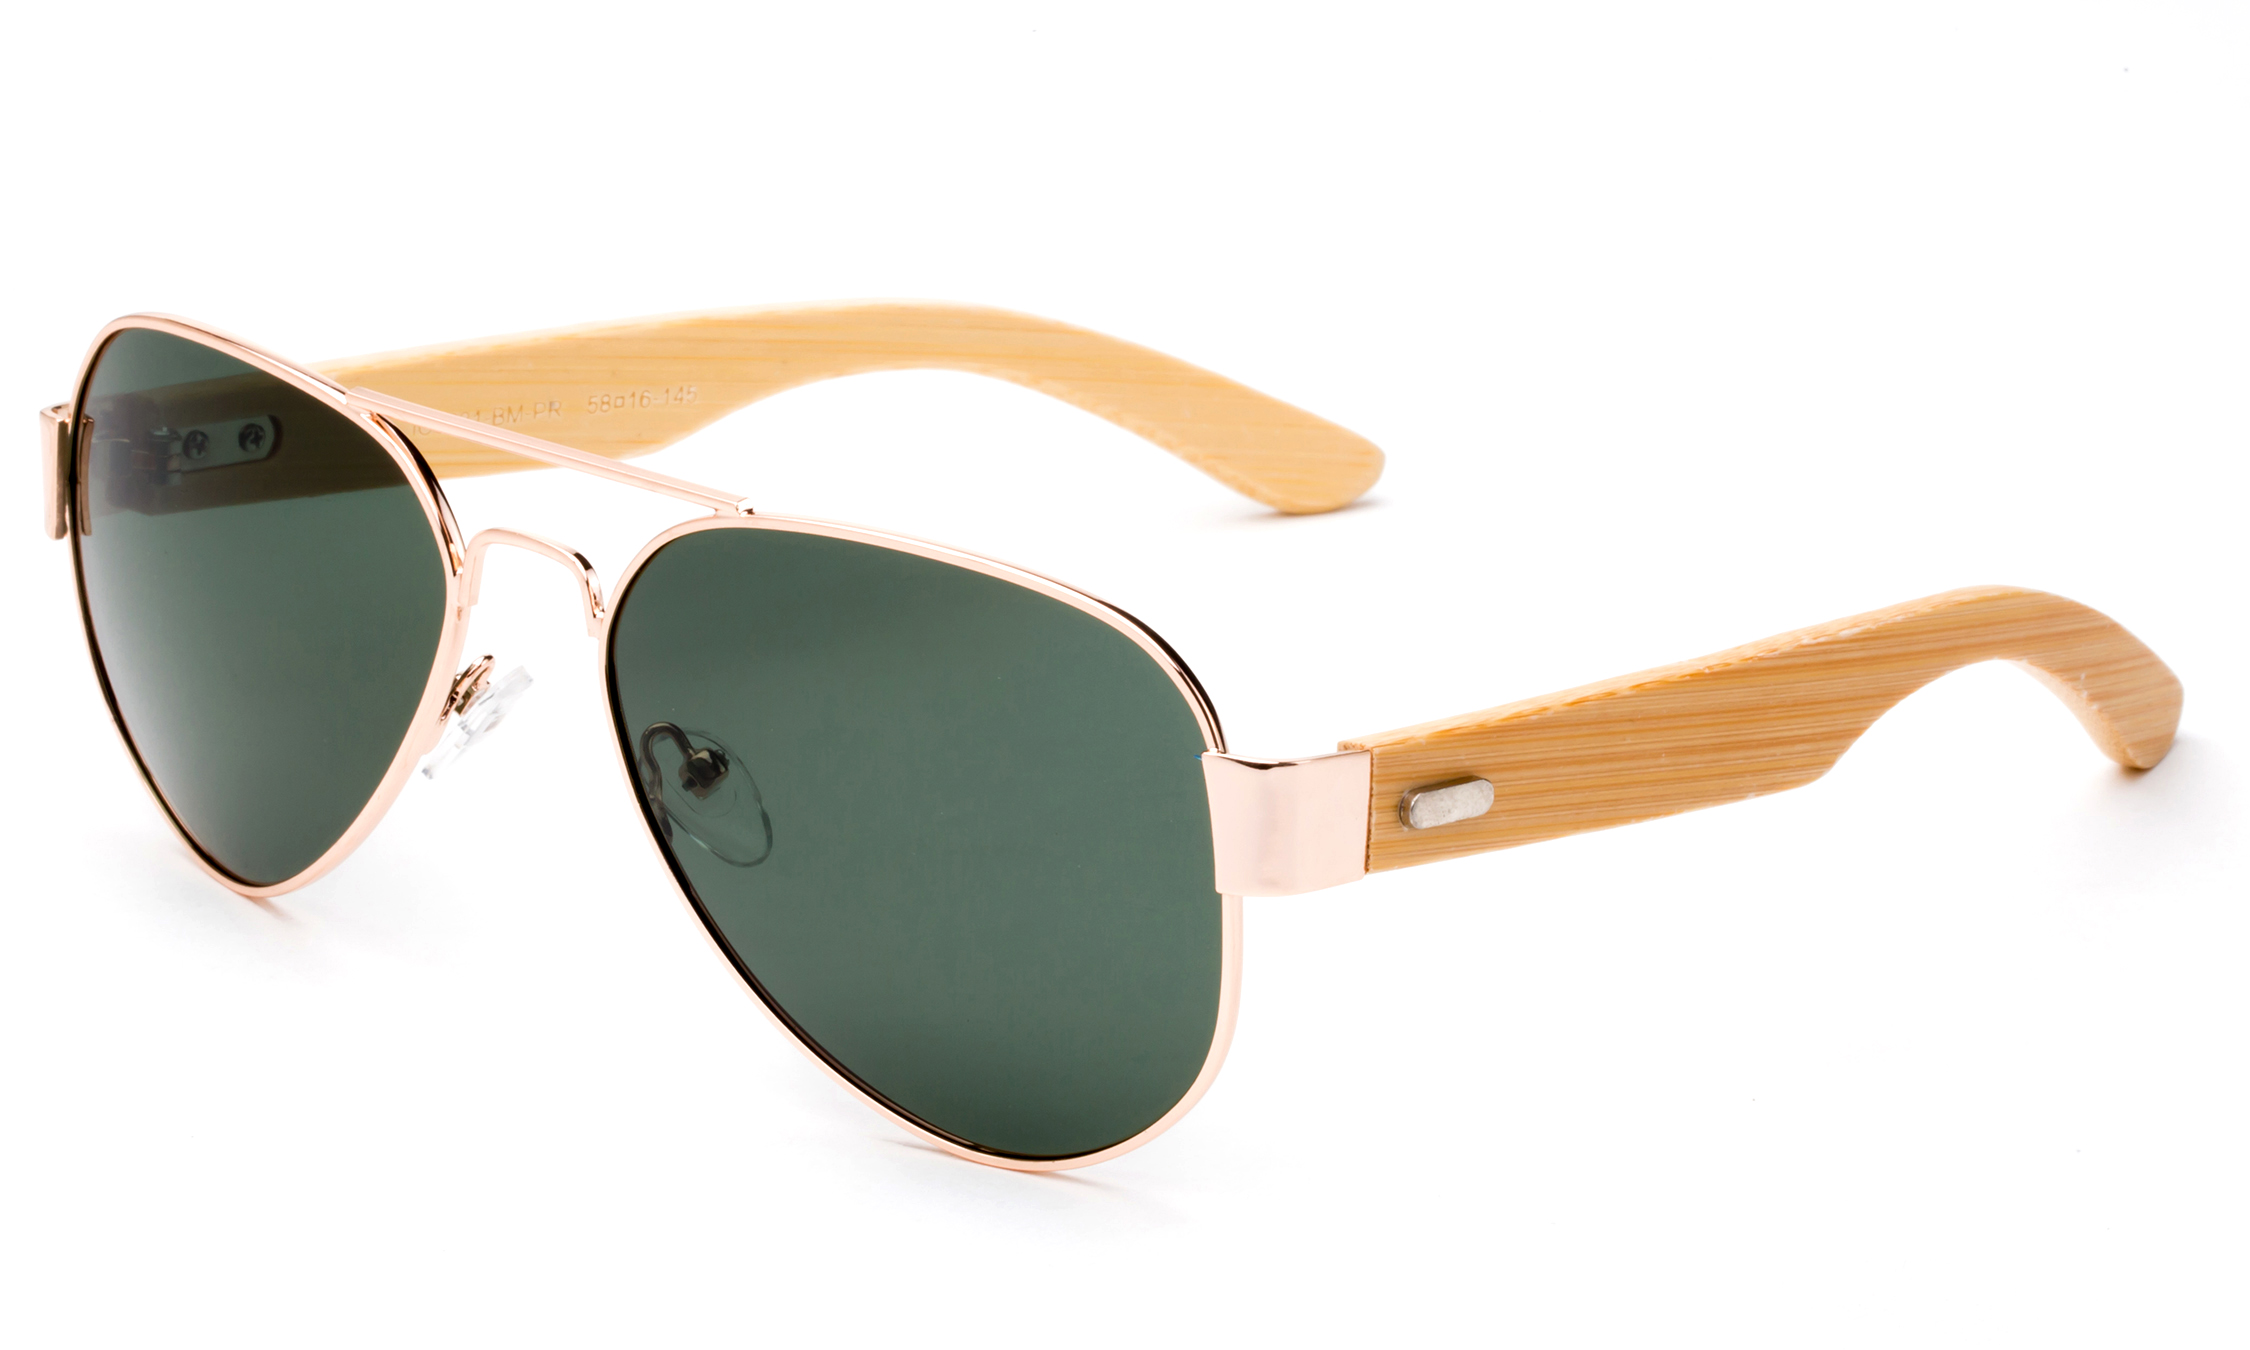 High Qaulity Polarized Sunglasses with Real Bamboo Arm Aviator Sunglasses Bamboo Sunglasses for Men & Women - image 2 of 2